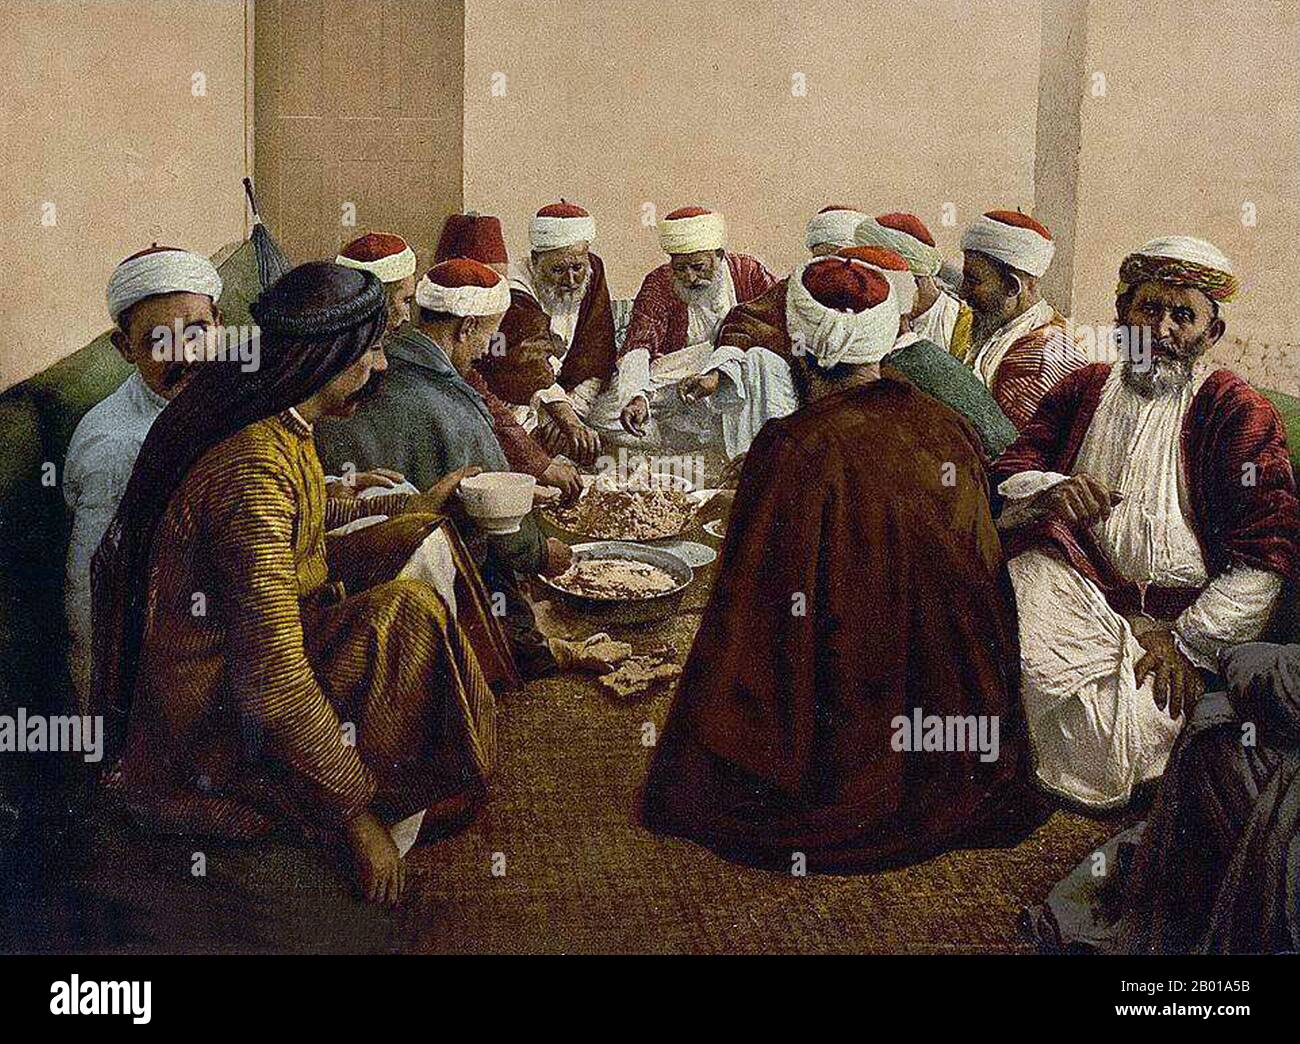 Palestine/Israel: Druze farmers of Mount Carmel sharing a meal. Photo by Felix Adrien Bonfils (8 March 1831 – 9 April 1885), 1880s.  The Druze (Arabic: derzī or durzī, plural durūz, Hebrew: druzim) are an esoteric, monotheistic religious community found primarily in Syria, Lebanon, Israel and Jordan, which emerged during the 11th century from Ismailism, that incorporated several elements of Gnosticism, Neoplatonism and other philosophies. The Druze call themselves Ahl al-Tawhid (People of Unitarianism or Monotheism) or al-Muwaḥḥidūn (Unitarians, Monotheists). Stock Photo